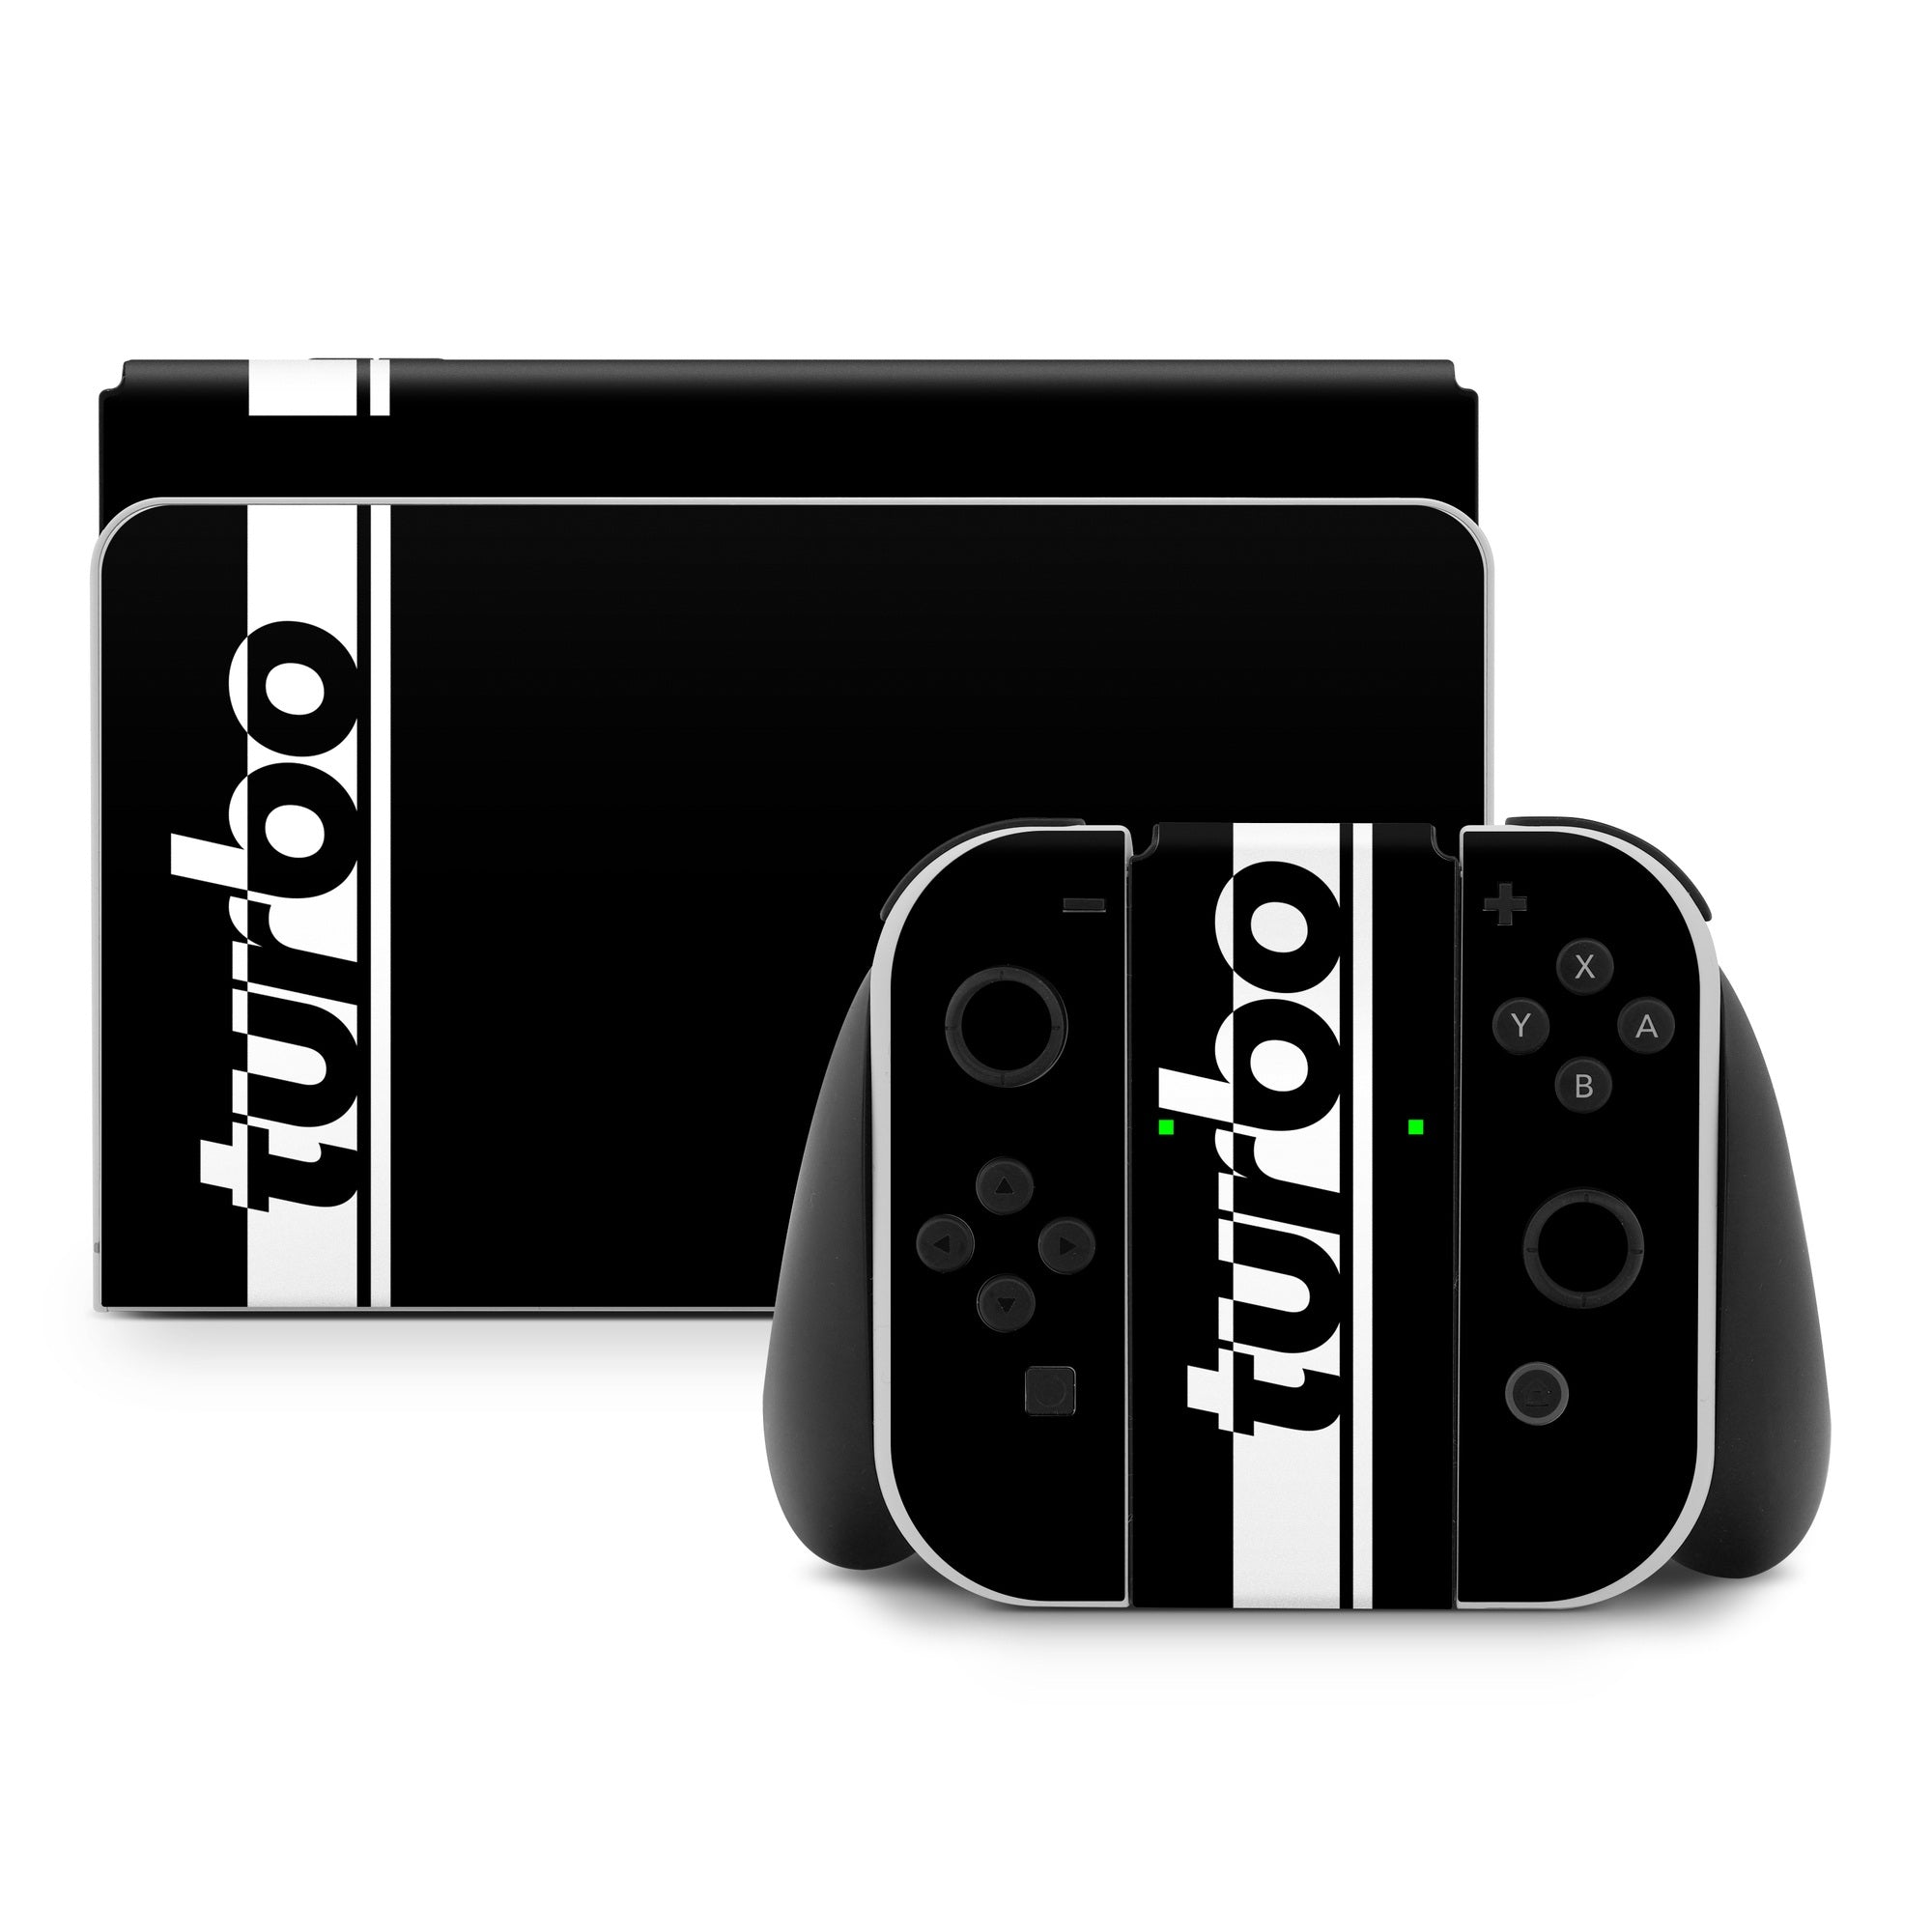 Boosted - Nintendo Switch Skin